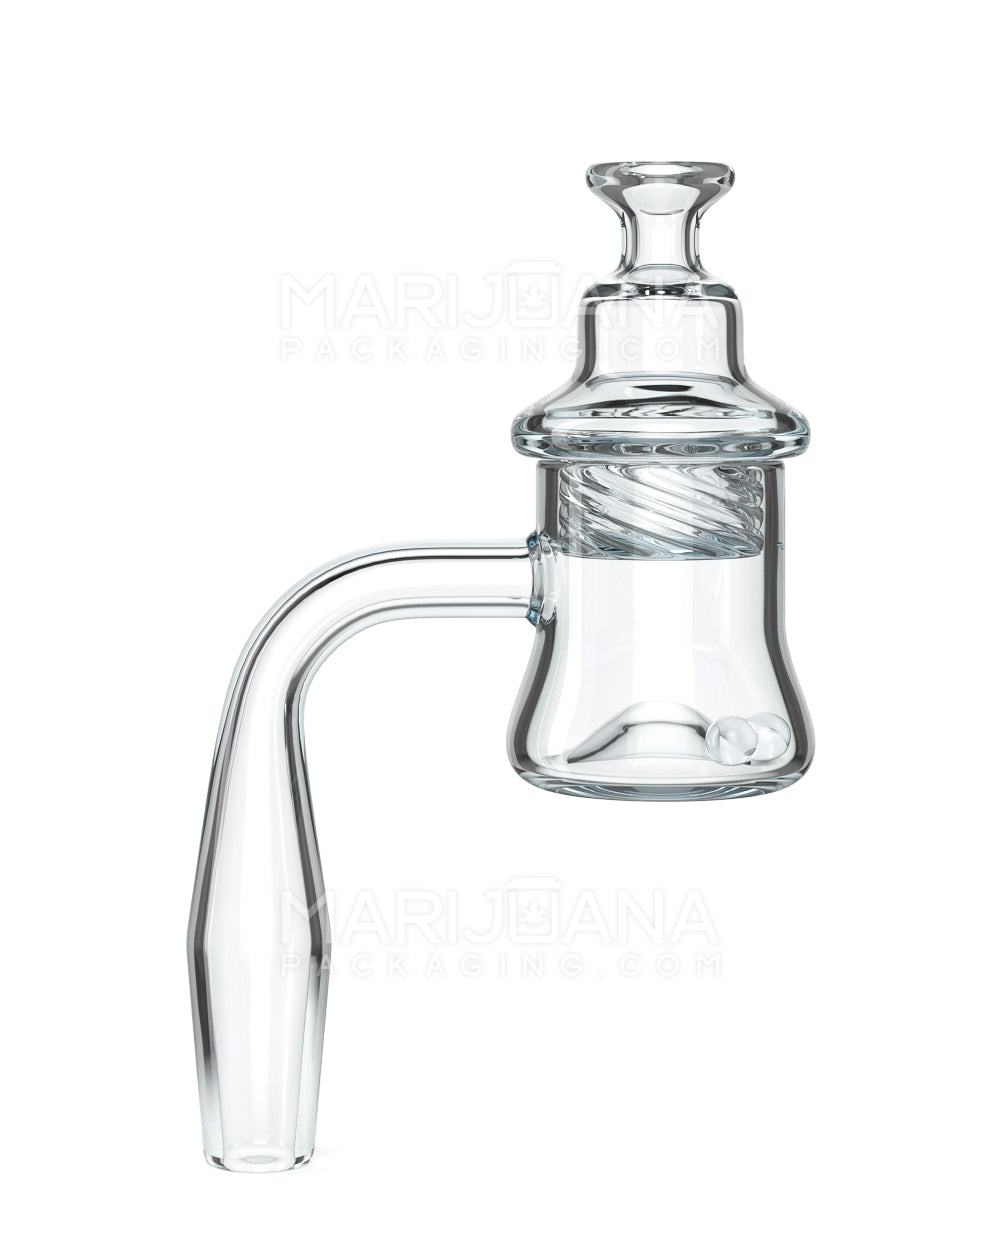 Thick 4mm Quartz Banger Kit w/ Bell Spinner Carb Cap & 2 Pearls | 14mm - 90 Degree - Male - 1